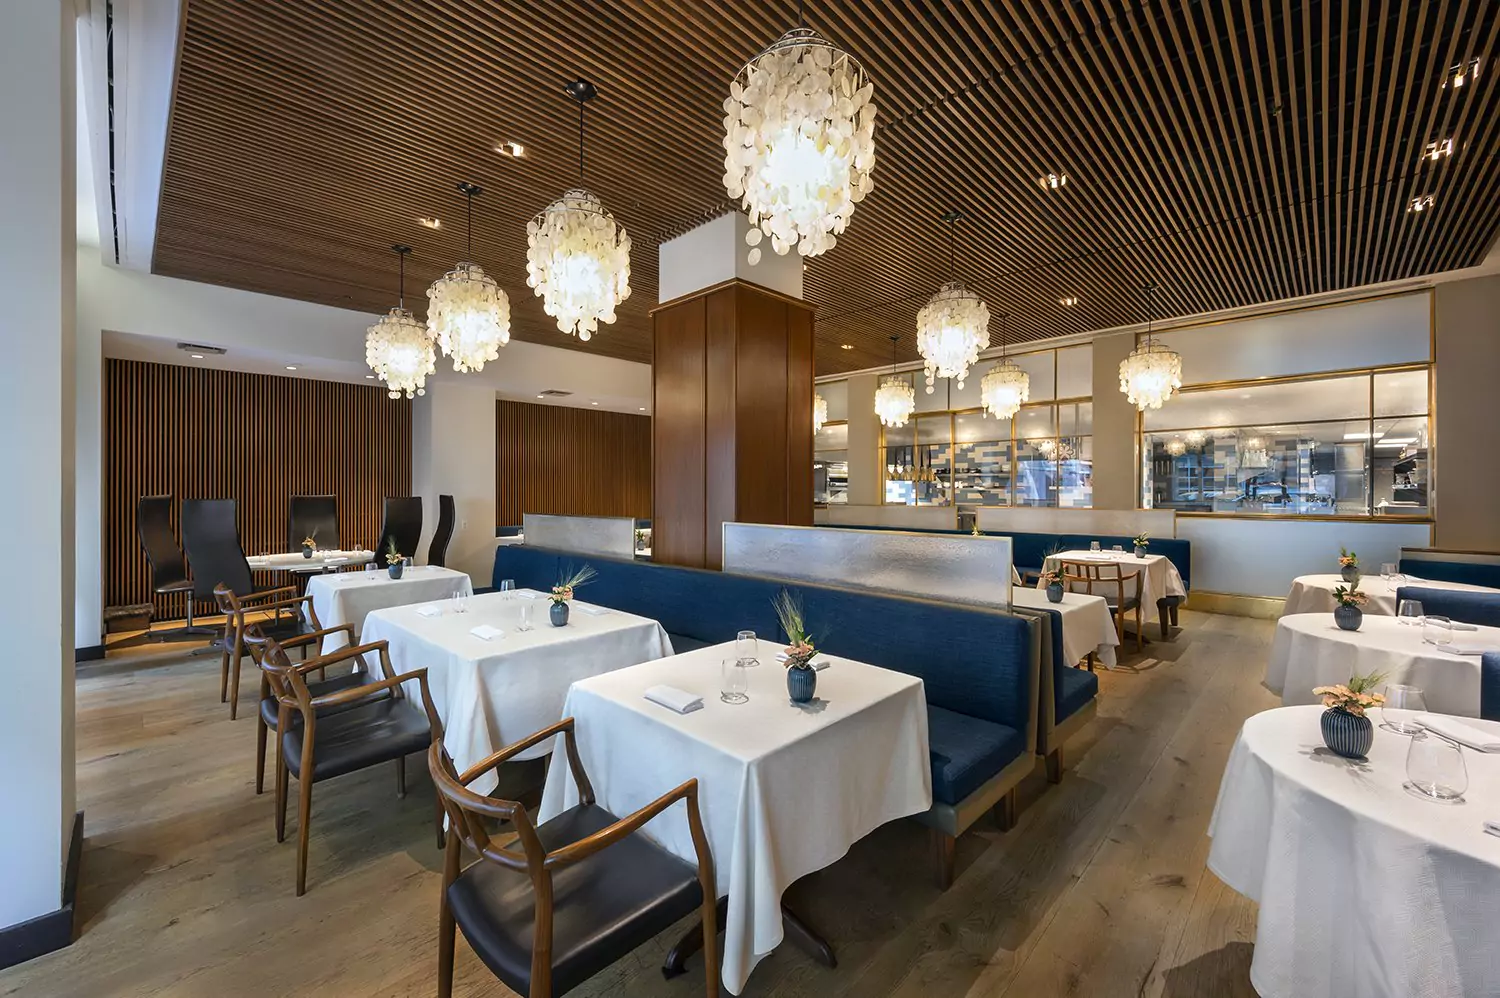 Modern and Luxury Dining Area in Aquavit with Scandinavian Furniture and Splashes of Blue